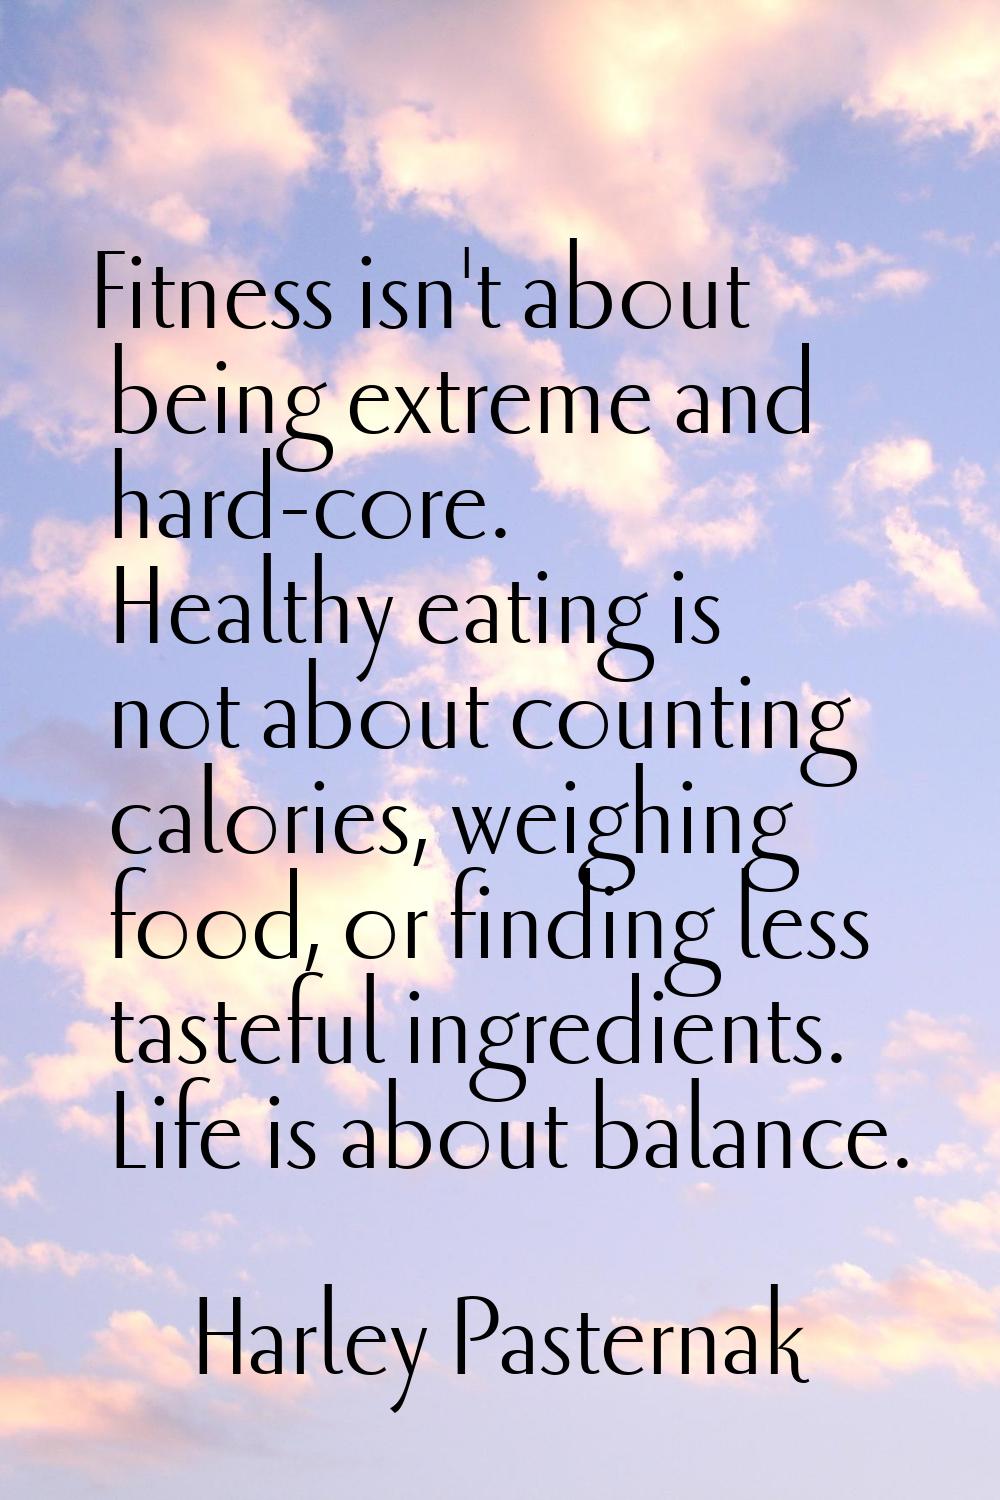 Fitness isn't about being extreme and hard-core. Healthy eating is not about counting calories, wei